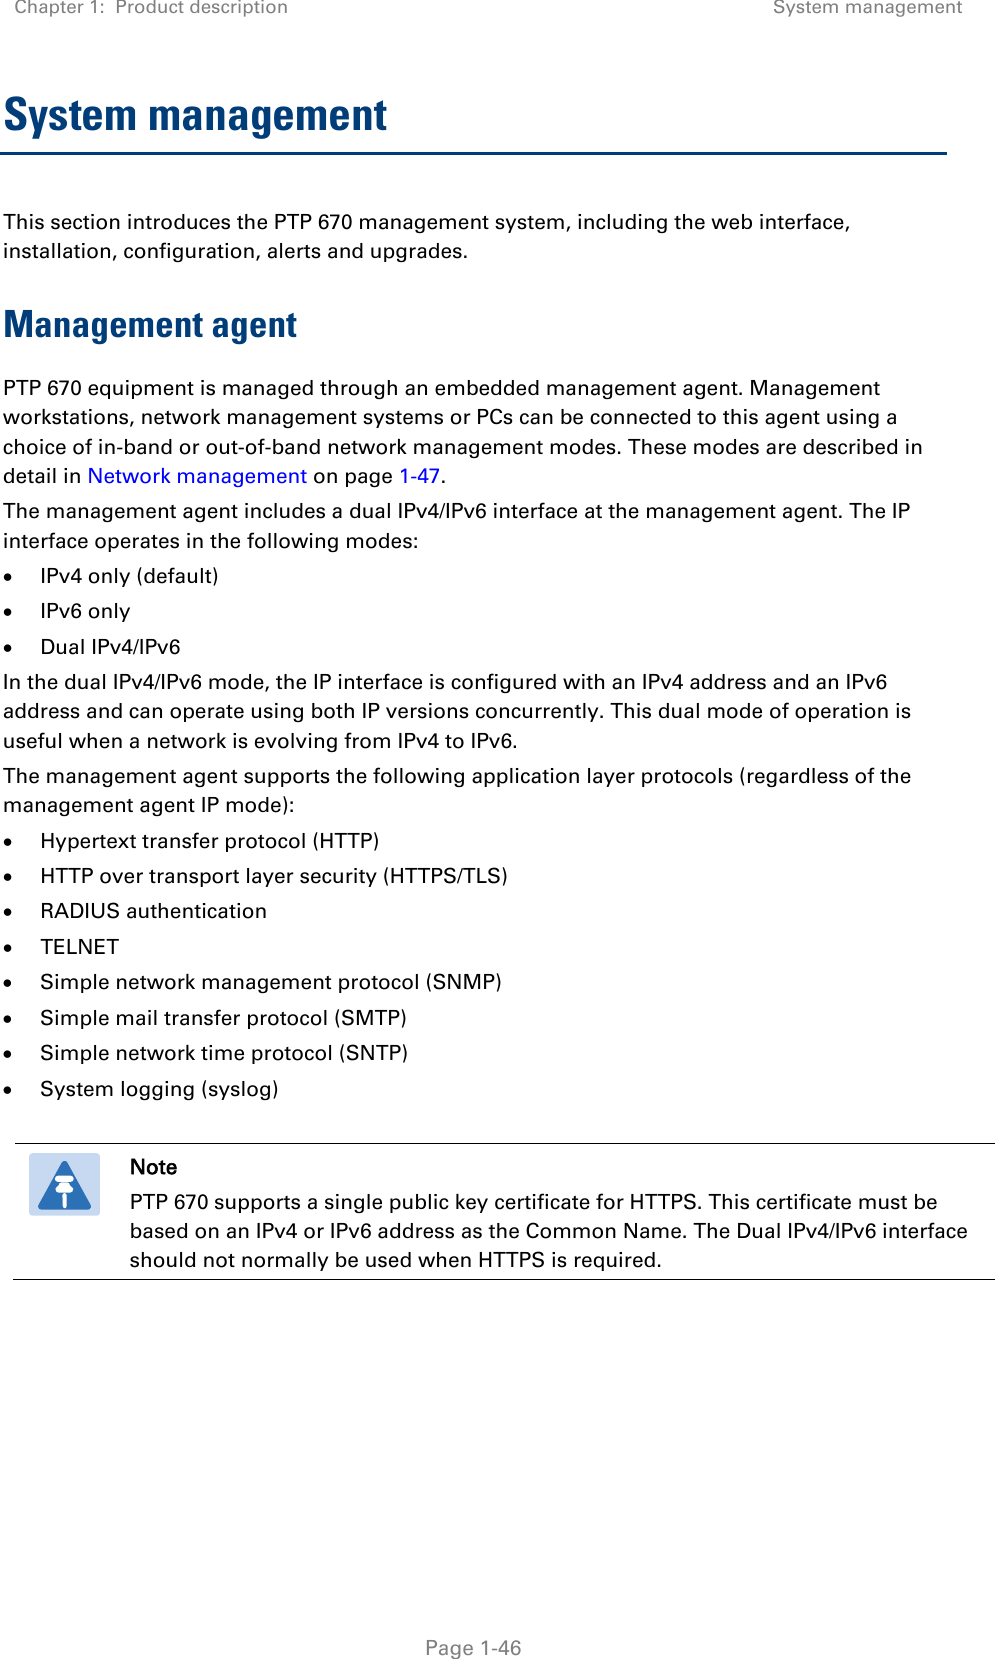 Chapter 1:  Product description System management   Page 1-46 System management  This section introduces the PTP 670 management system, including the web interface, installation, configuration, alerts and upgrades. Management agent PTP 670 equipment is managed through an embedded management agent. Management workstations, network management systems or PCs can be connected to this agent using a choice of in-band or out-of-band network management modes. These modes are described in detail in Network management on page 1-47. The management agent includes a dual IPv4/IPv6 interface at the management agent. The IP interface operates in the following modes: • IPv4 only (default) • IPv6 only • Dual IPv4/IPv6 In the dual IPv4/IPv6 mode, the IP interface is configured with an IPv4 address and an IPv6 address and can operate using both IP versions concurrently. This dual mode of operation is useful when a network is evolving from IPv4 to IPv6. The management agent supports the following application layer protocols (regardless of the management agent IP mode): • Hypertext transfer protocol (HTTP) • HTTP over transport layer security (HTTPS/TLS) • RADIUS authentication • TELNET • Simple network management protocol (SNMP) • Simple mail transfer protocol (SMTP) • Simple network time protocol (SNTP) • System logging (syslog)   Note PTP 670 supports a single public key certificate for HTTPS. This certificate must be based on an IPv4 or IPv6 address as the Common Name. The Dual IPv4/IPv6 interface should not normally be used when HTTPS is required.     